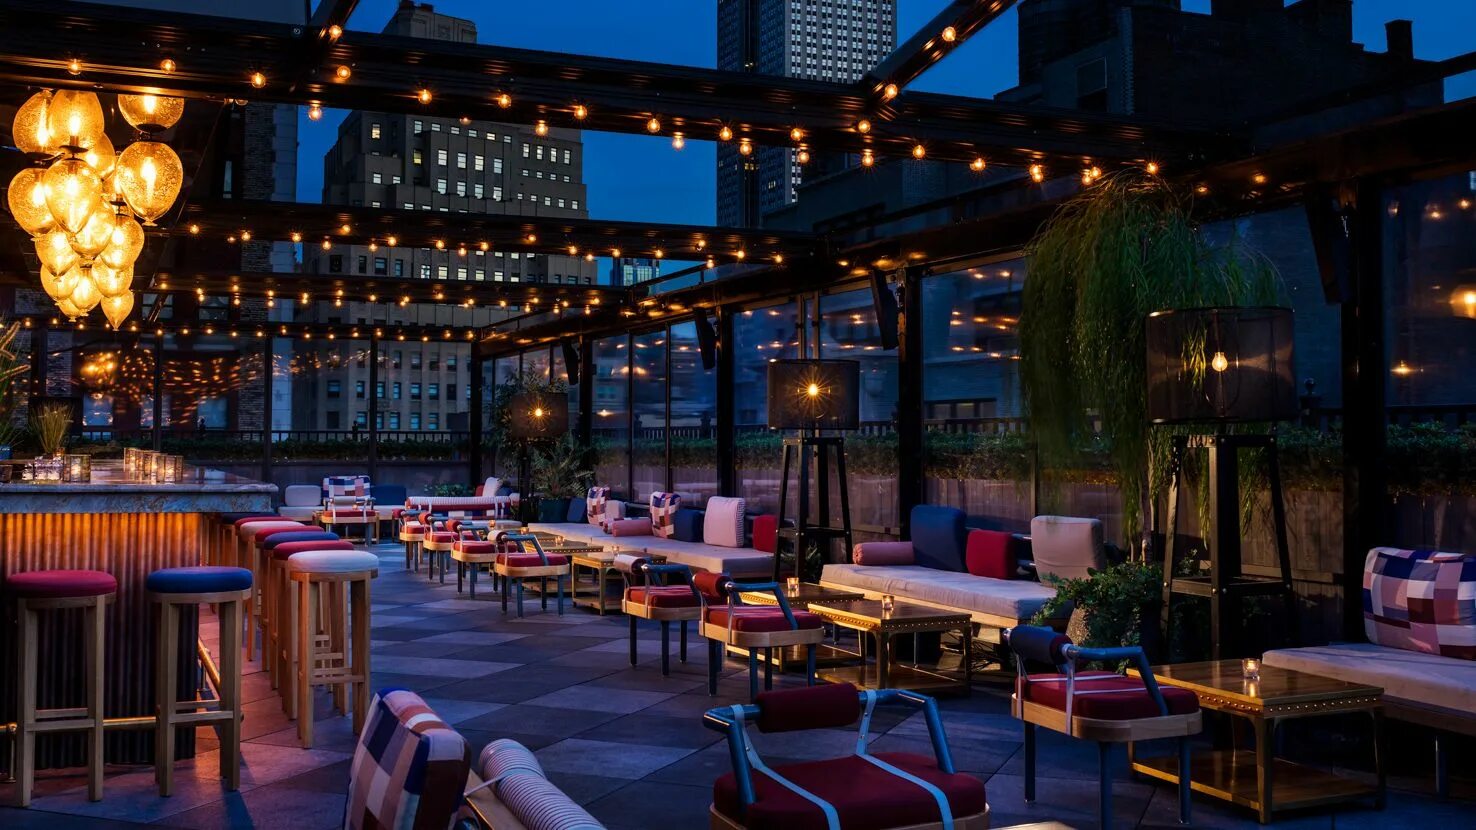 Magic Rooftop. Moxy-times-Square. Fantomas Rooftop VIP Lounge. Magic hour